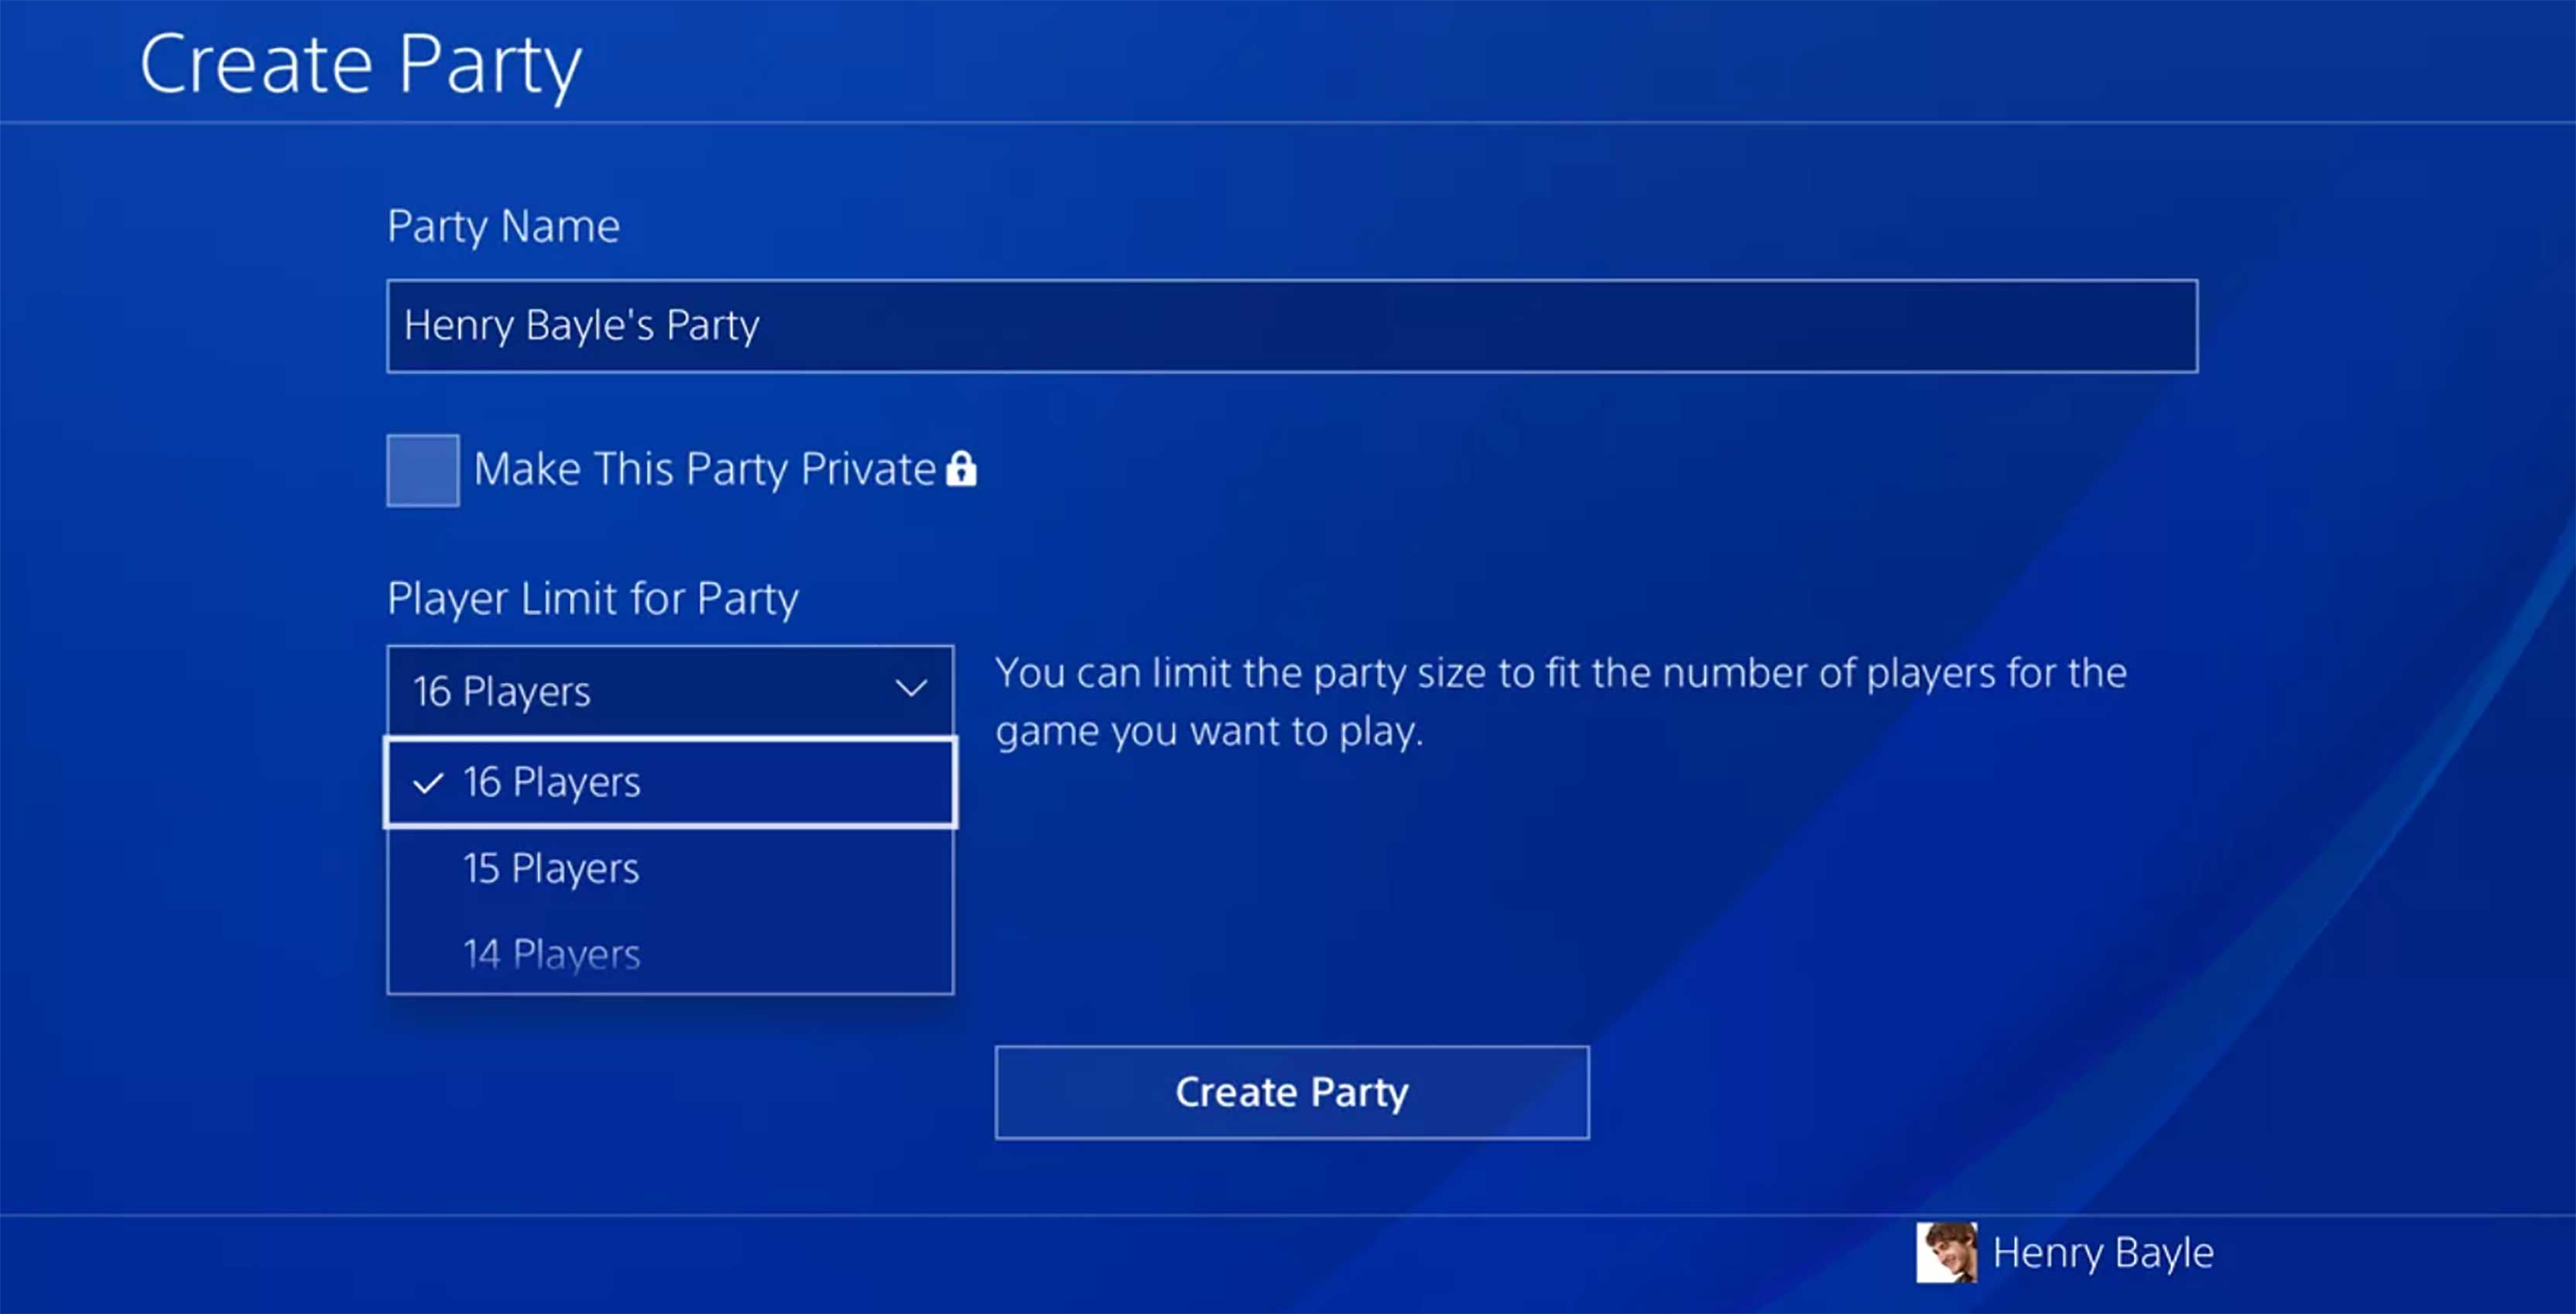 PlayStation 4 expanded parties